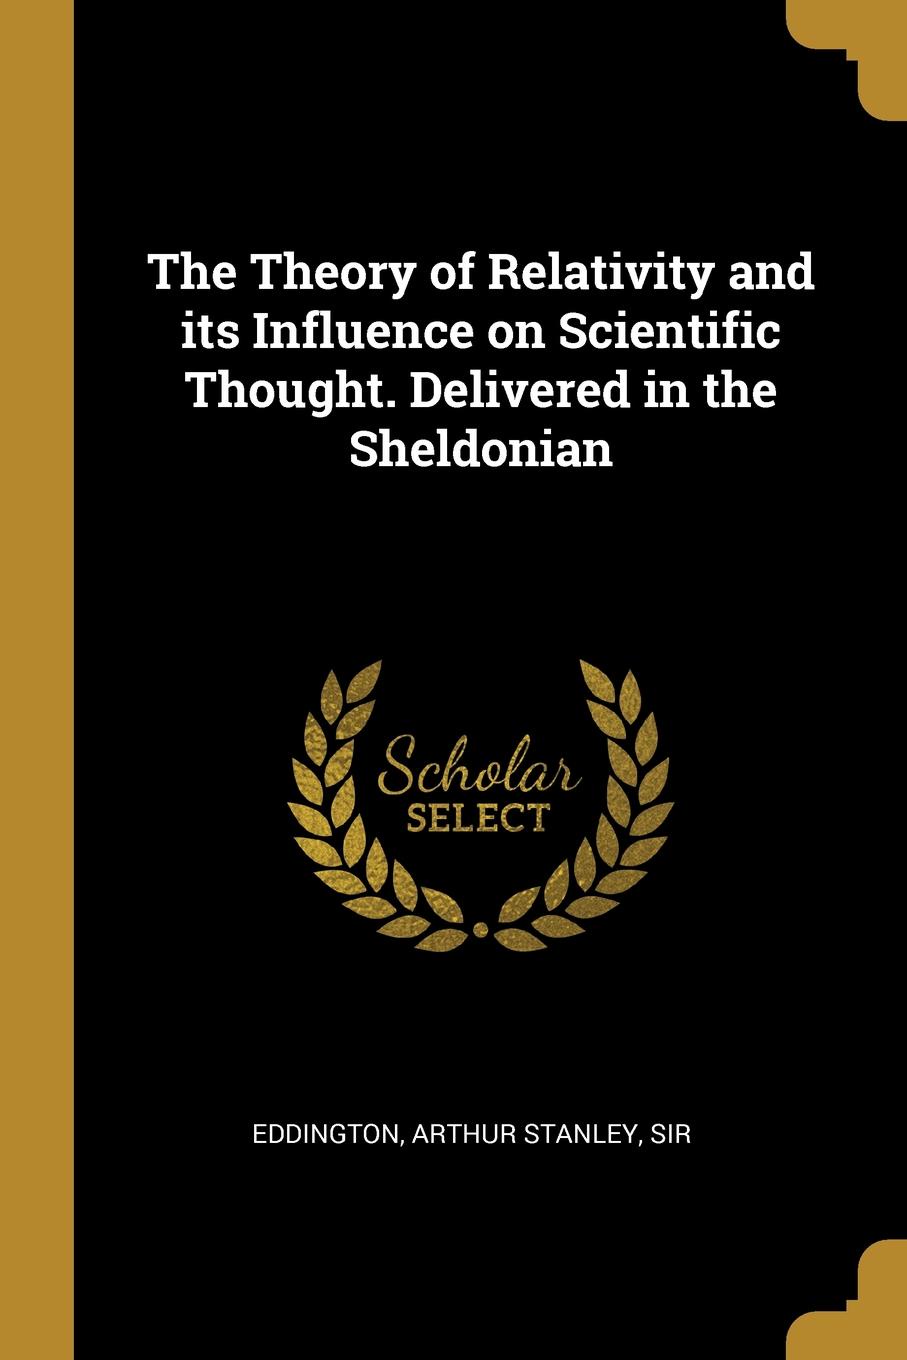 The Theory of Relativity and its Influence on Scientific Thought. Delivered in the Sheldonian